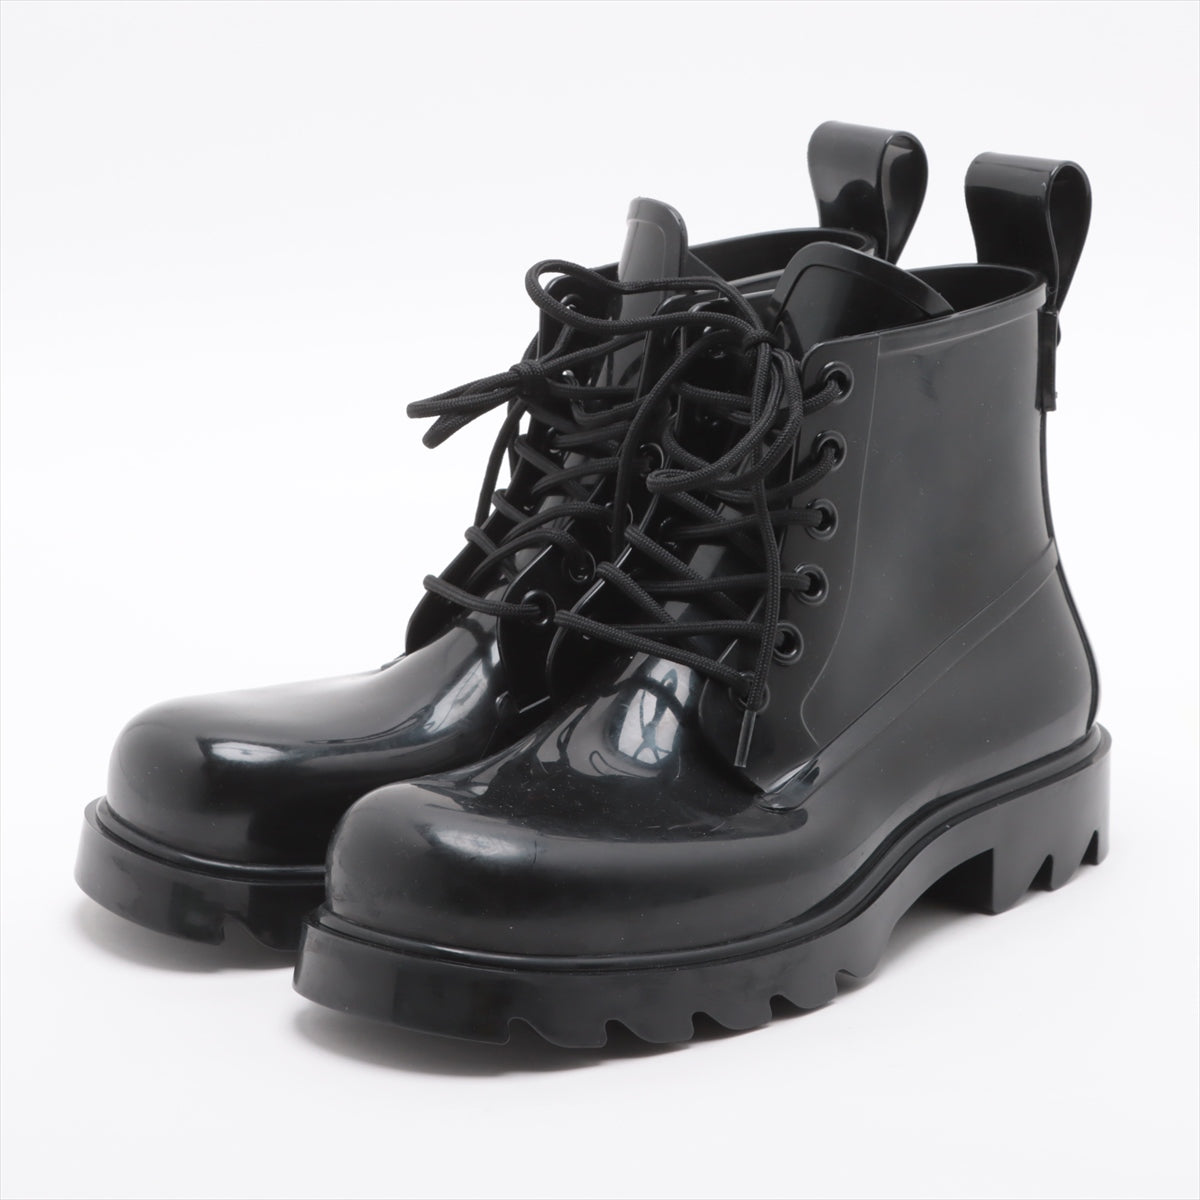 Bottega Veneta Rubber Boots 41 Men's Black Lace up Is there a replacement string Box lid damaged